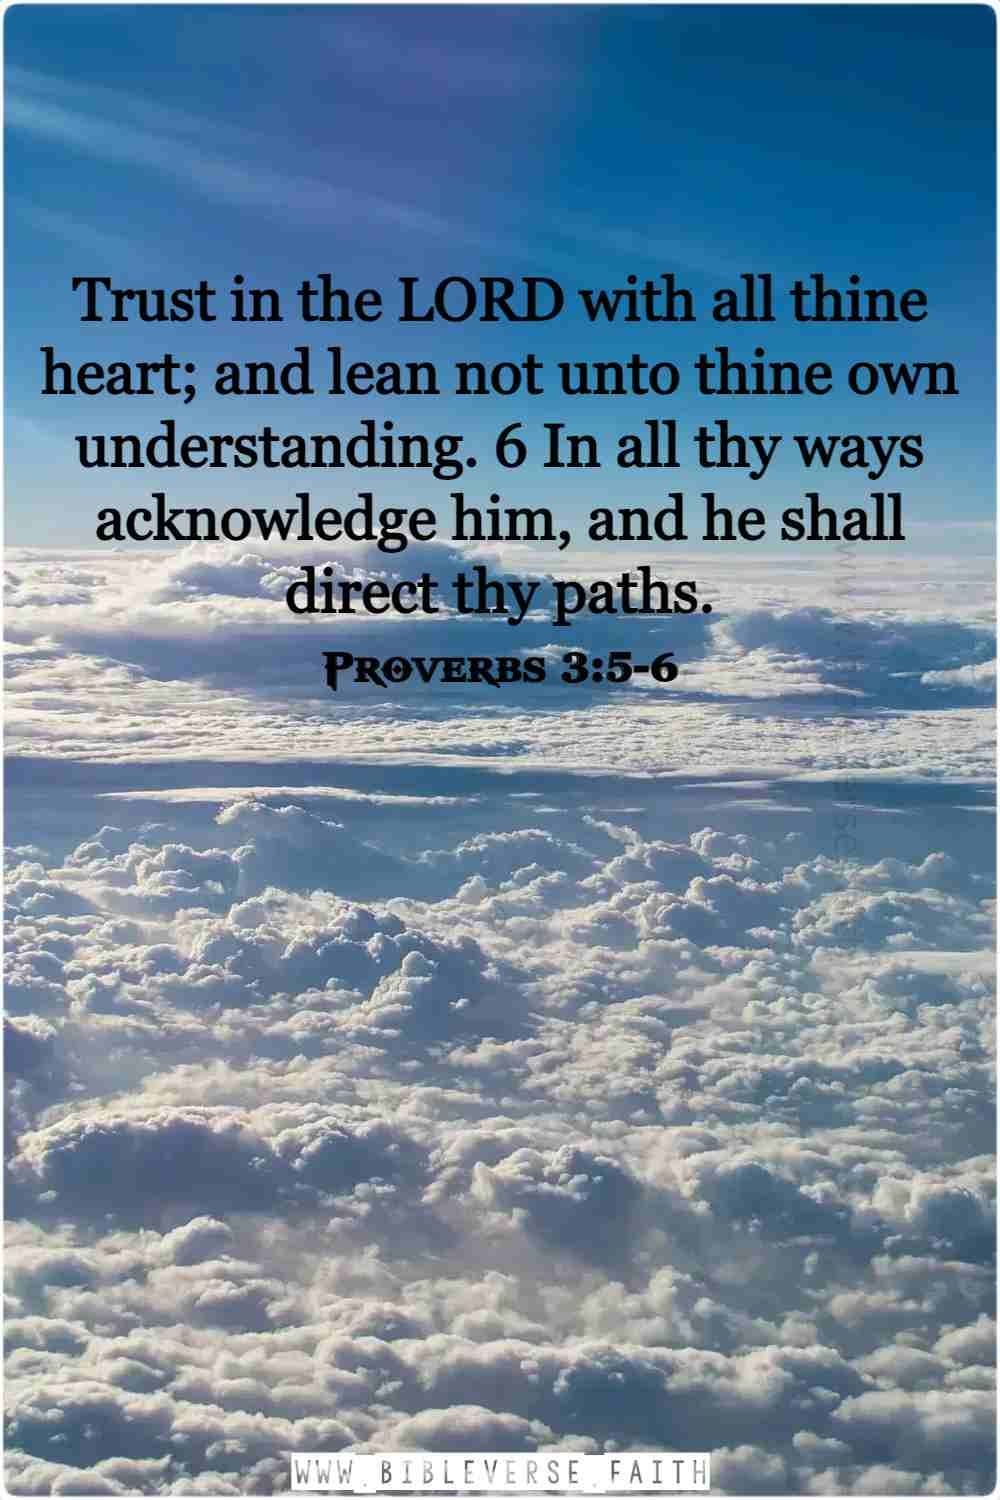 proverbs 3 5 6 bible verses about trusting god's plan